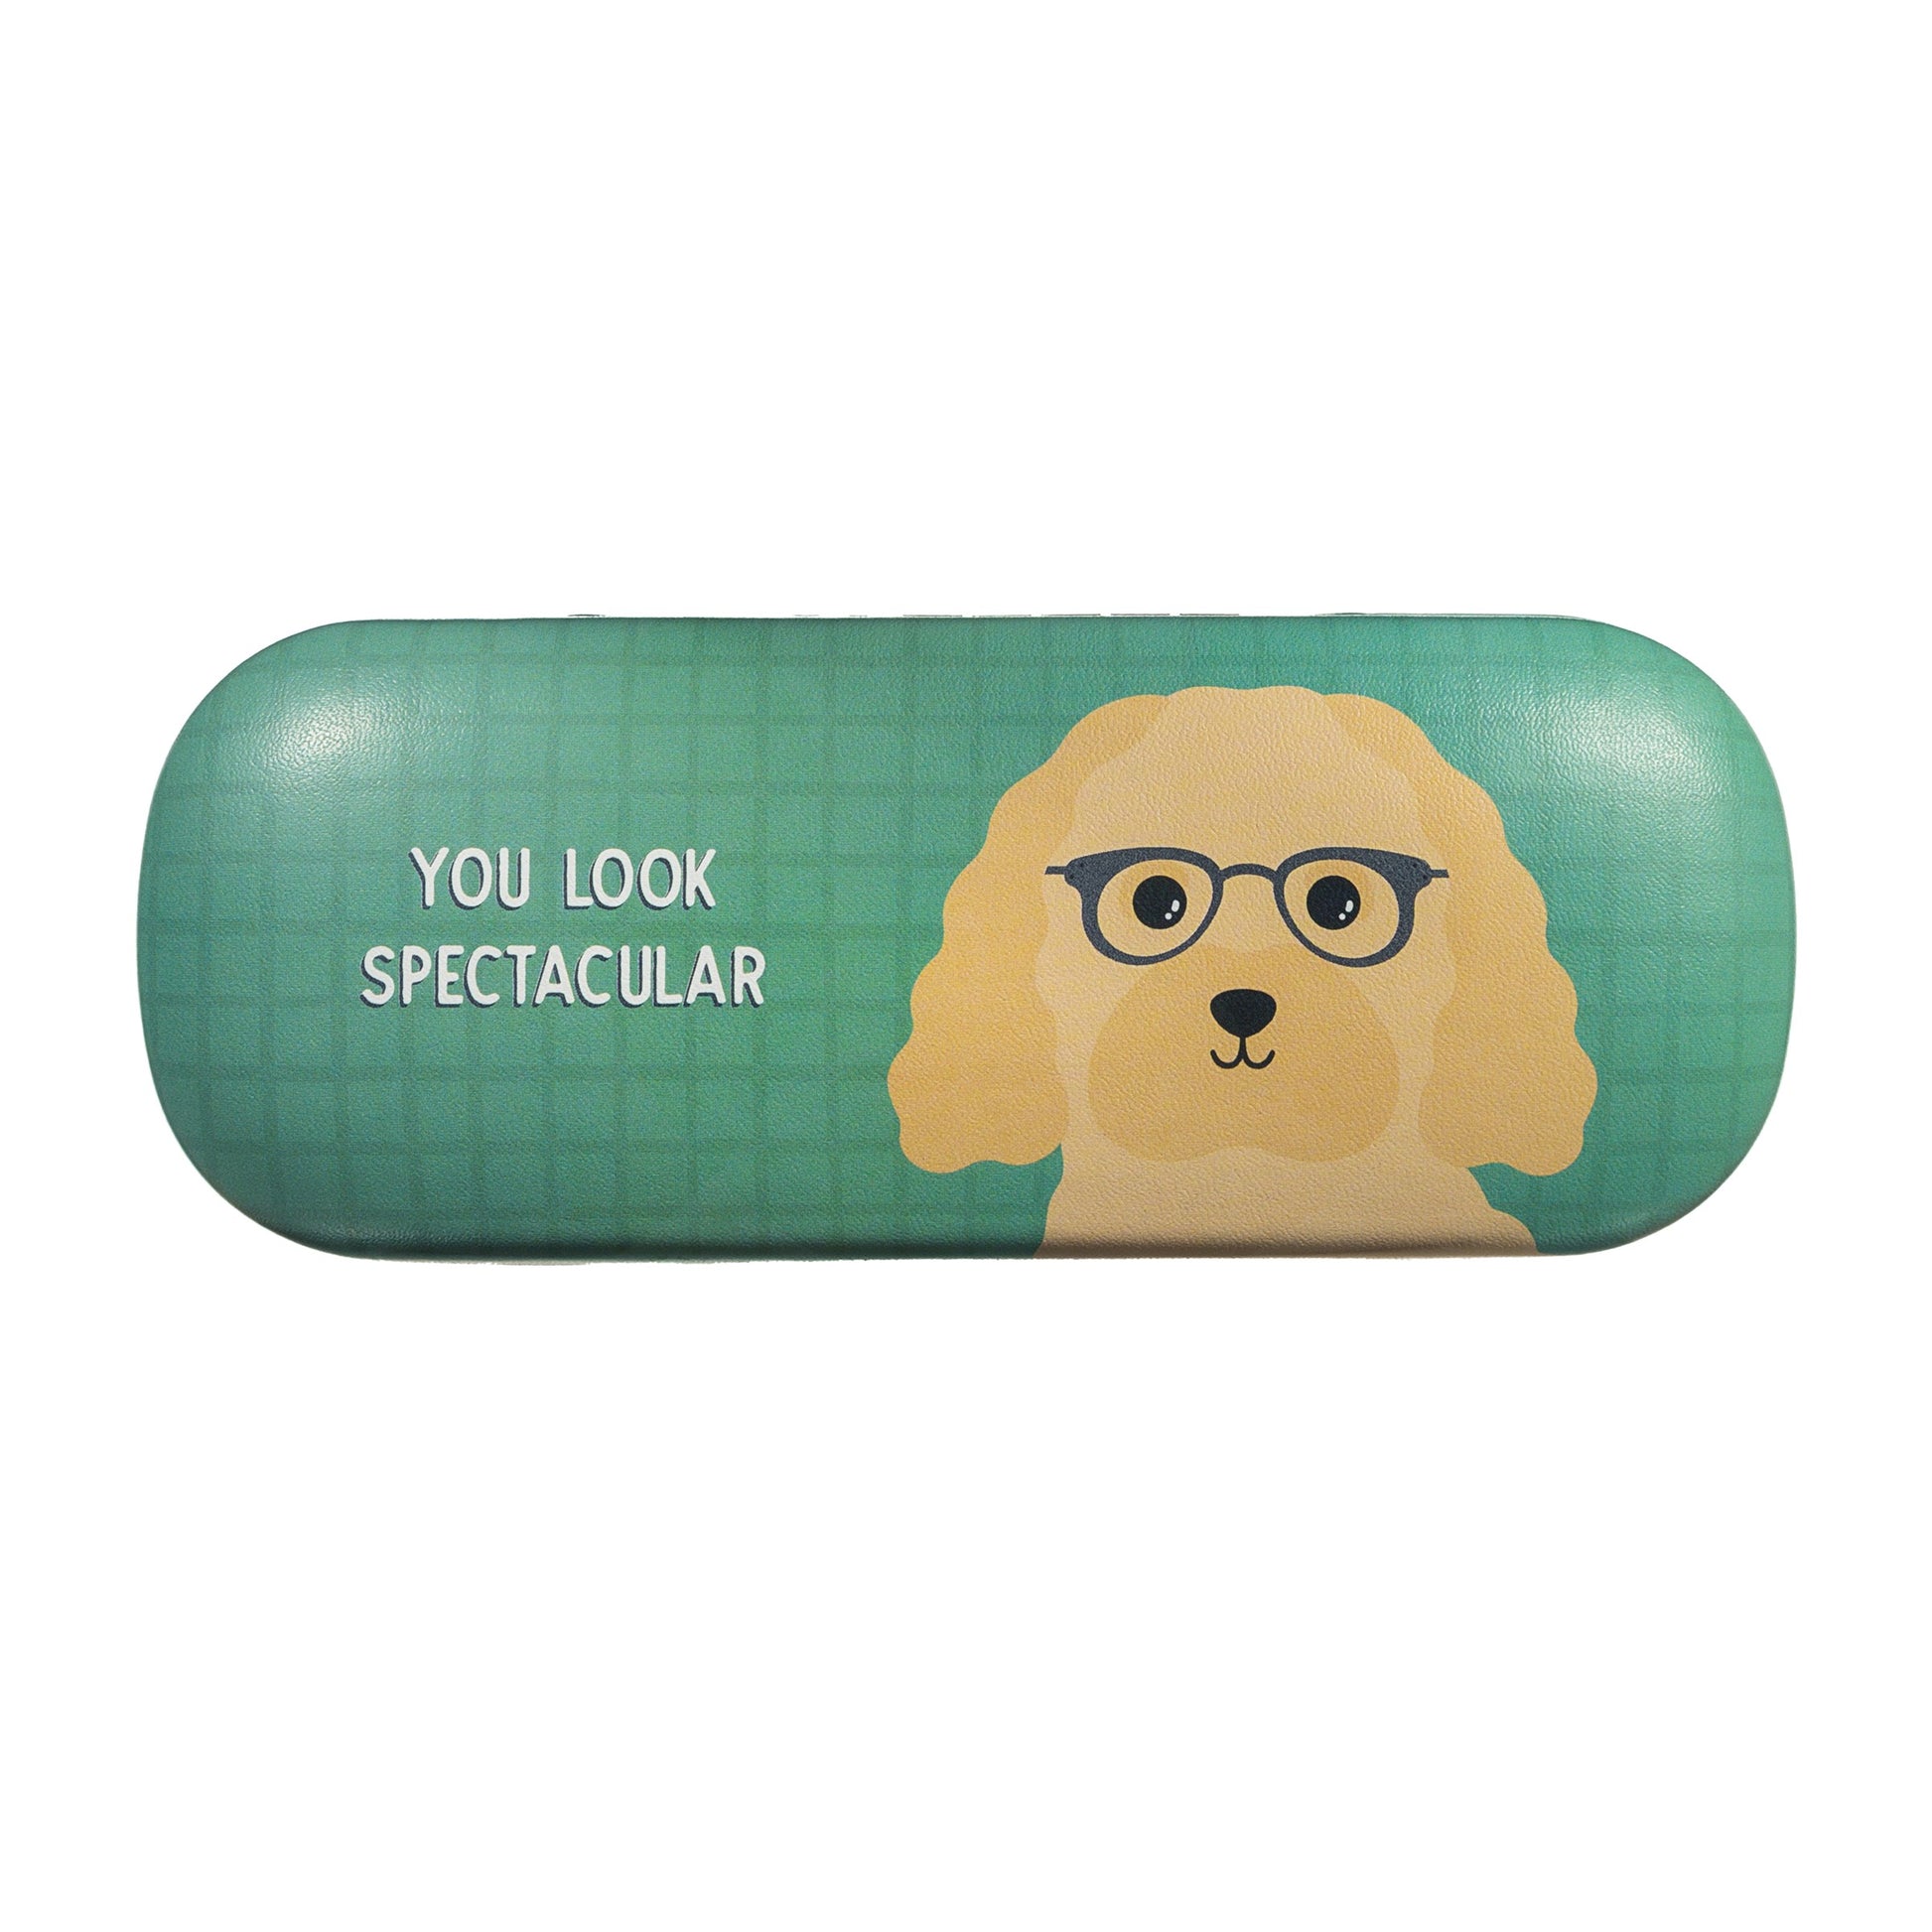 Keep your glasses safe and stylish with our Turquoise Blue Cockapoo Glasses Case! This fun and functional case features a playful cockapoo character and the quote "you look spectacular" in bold letters. The soft interior and included cleaning cloth will keep your glasses scratch-free and smudge-free, while the bright turquoise blue colour will make it easy to spot in your bag.